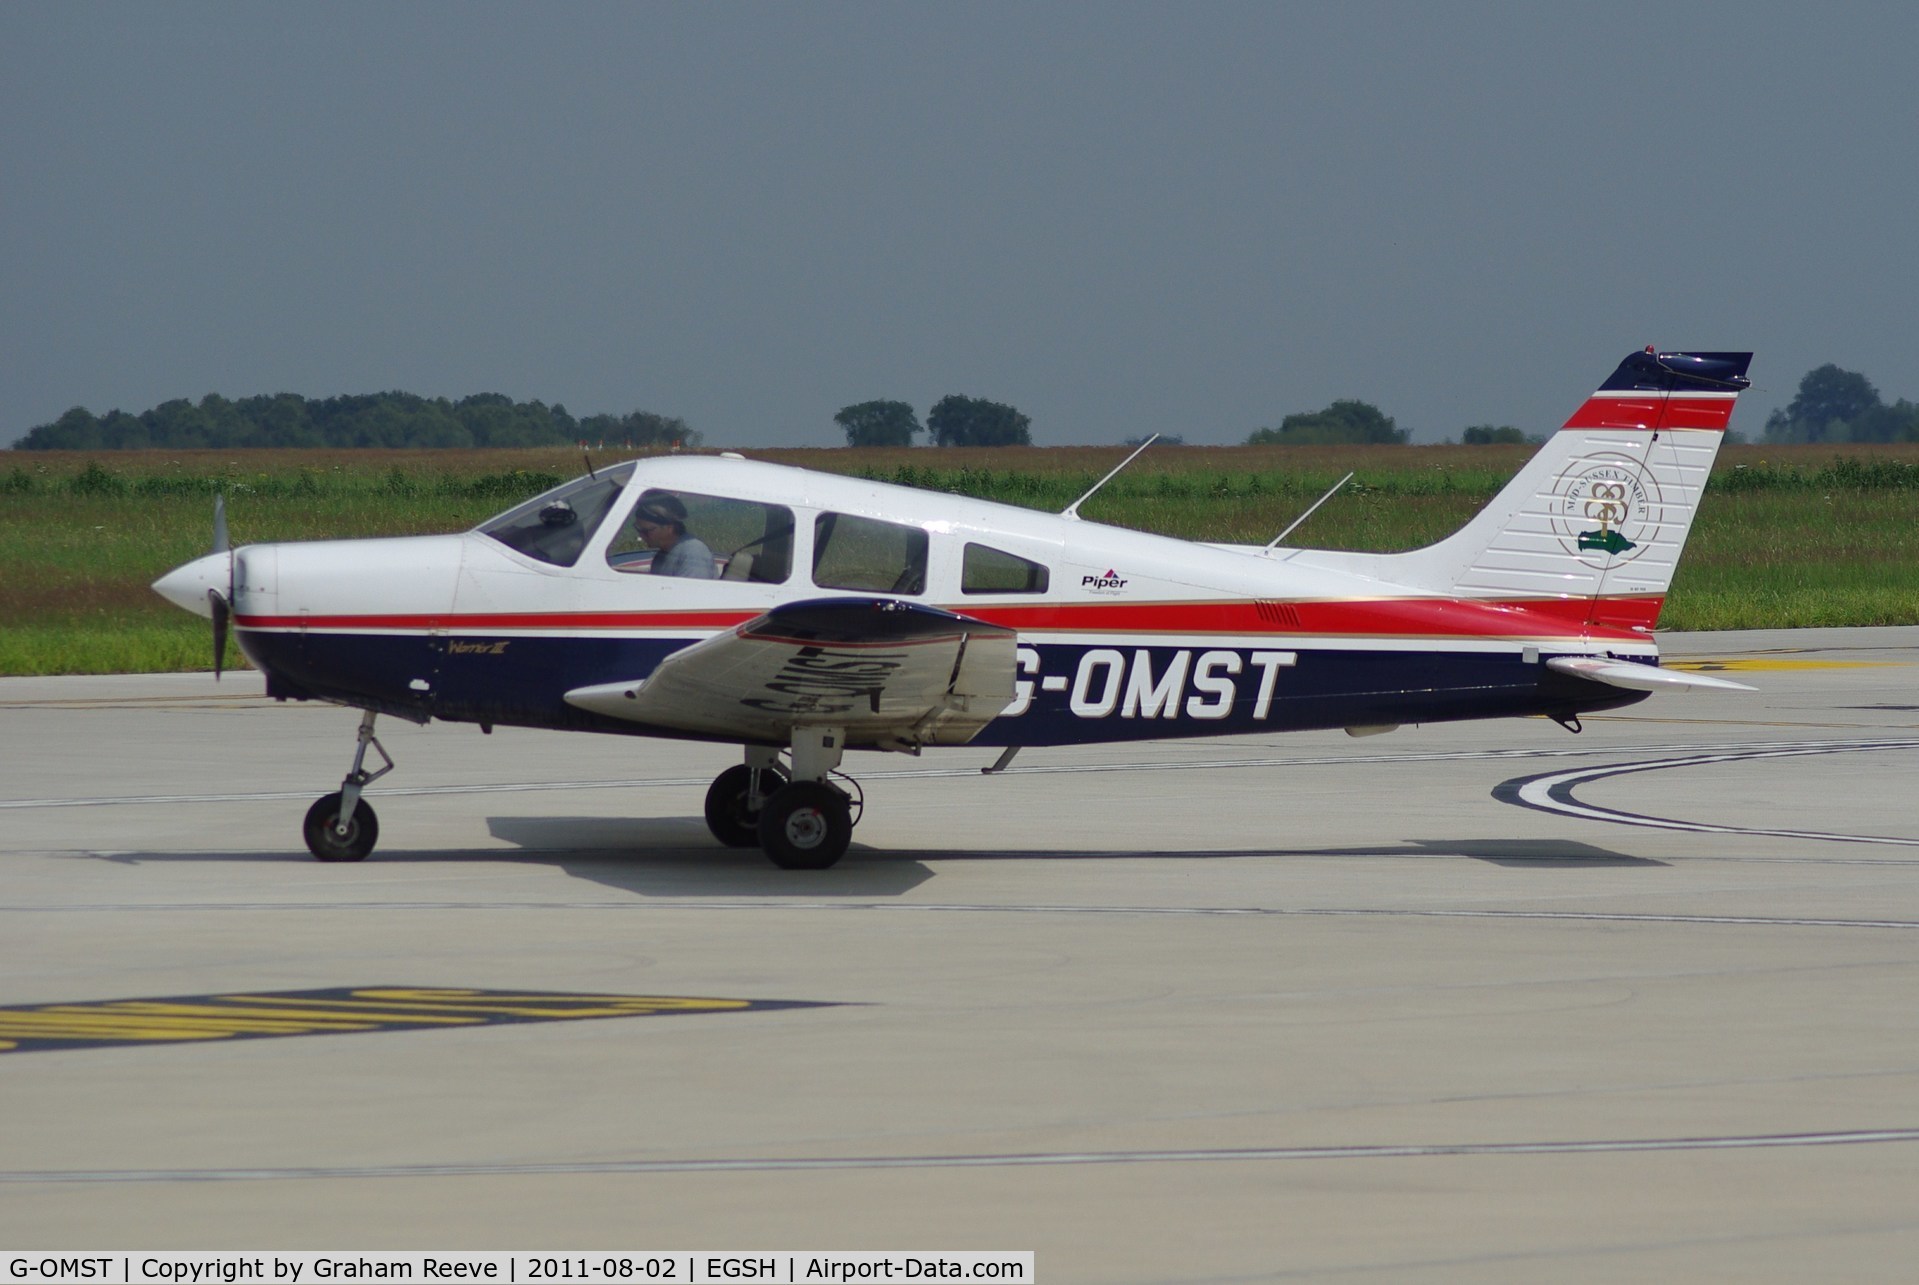 G-OMST, 2001 Piper PA-28-161 Cherokee Warrior III C/N 2842121, Parked at Norwich.